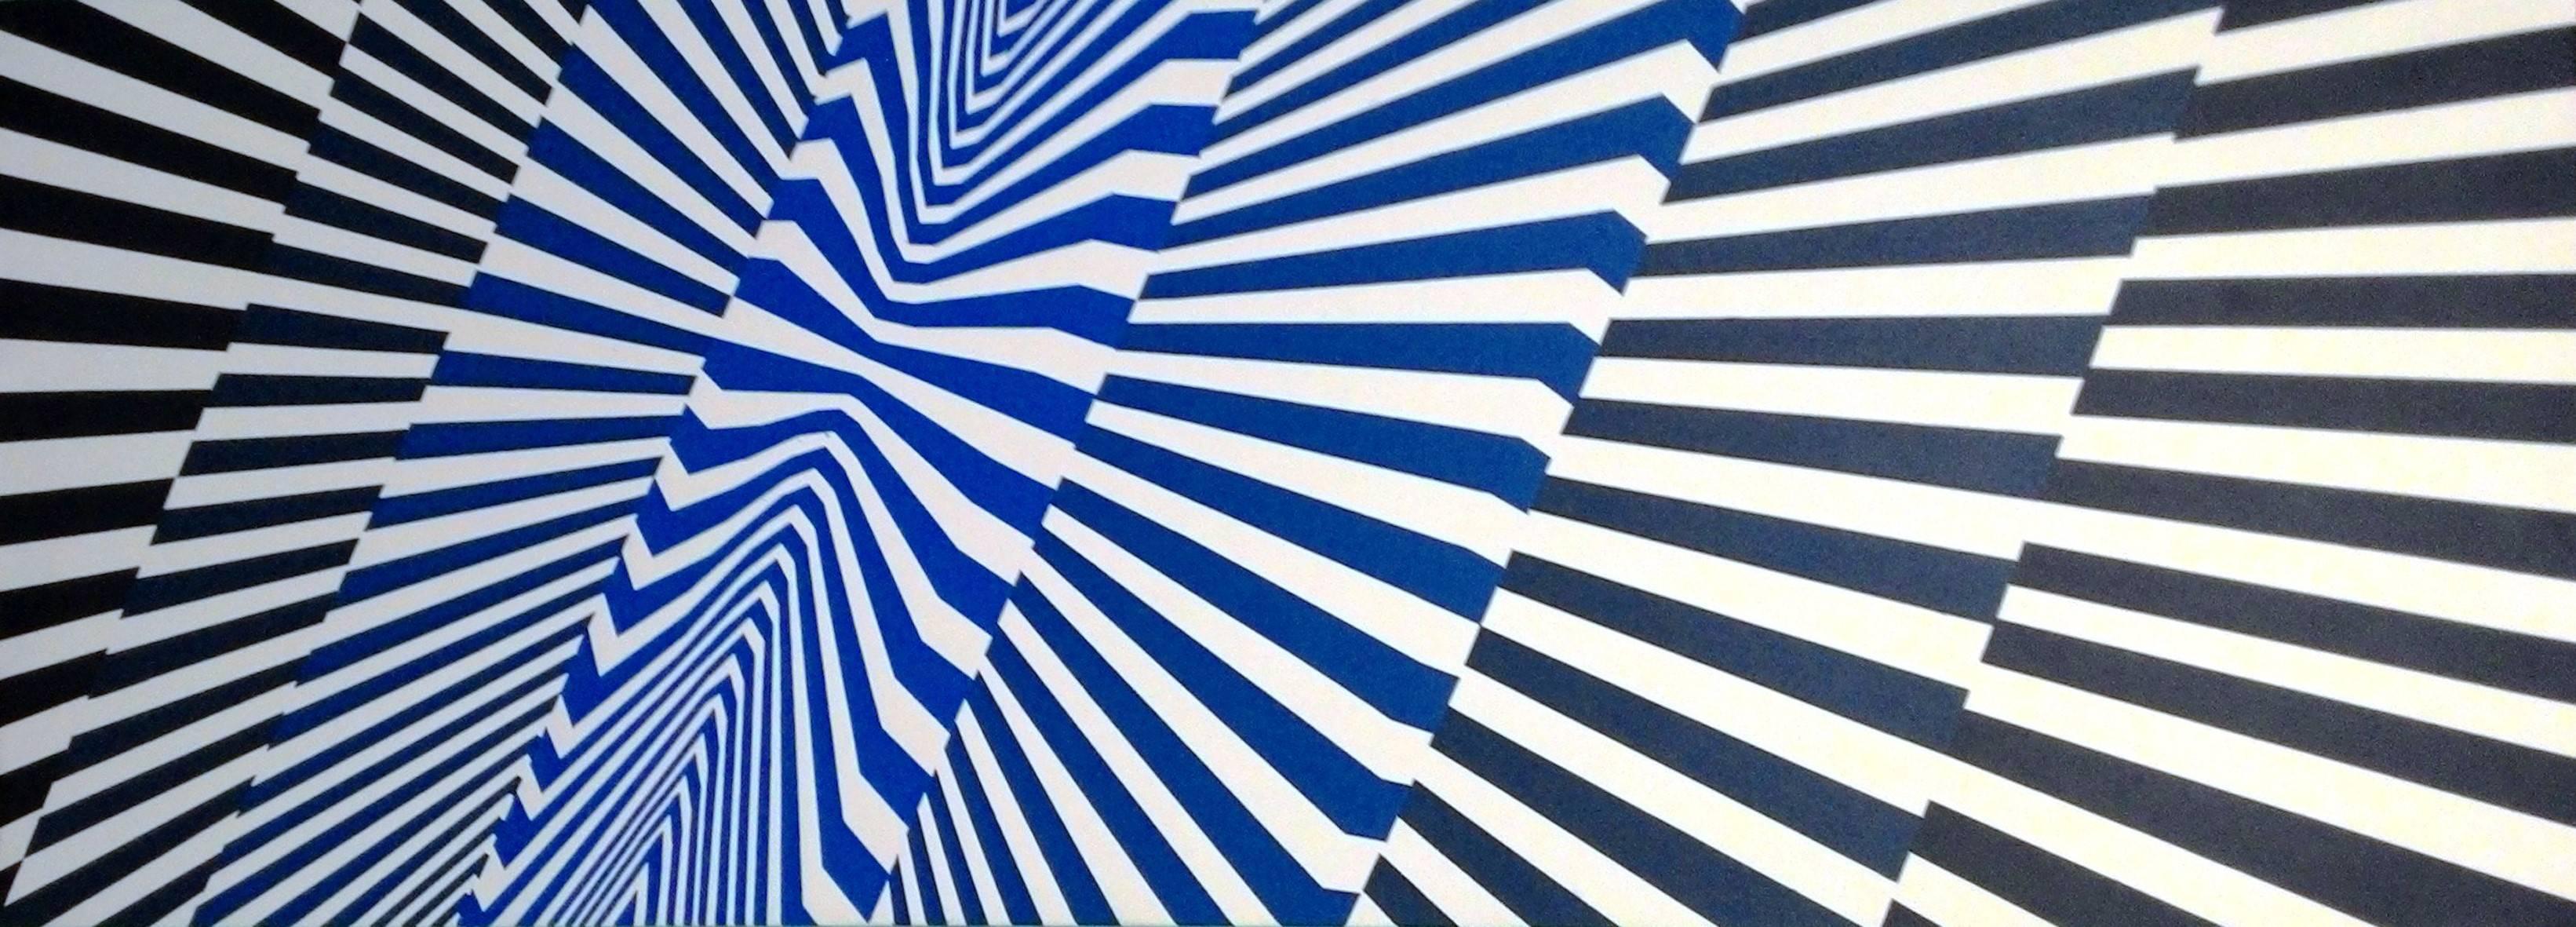 'Folding Pattern' Blue and White Abstract Kinetic Painting